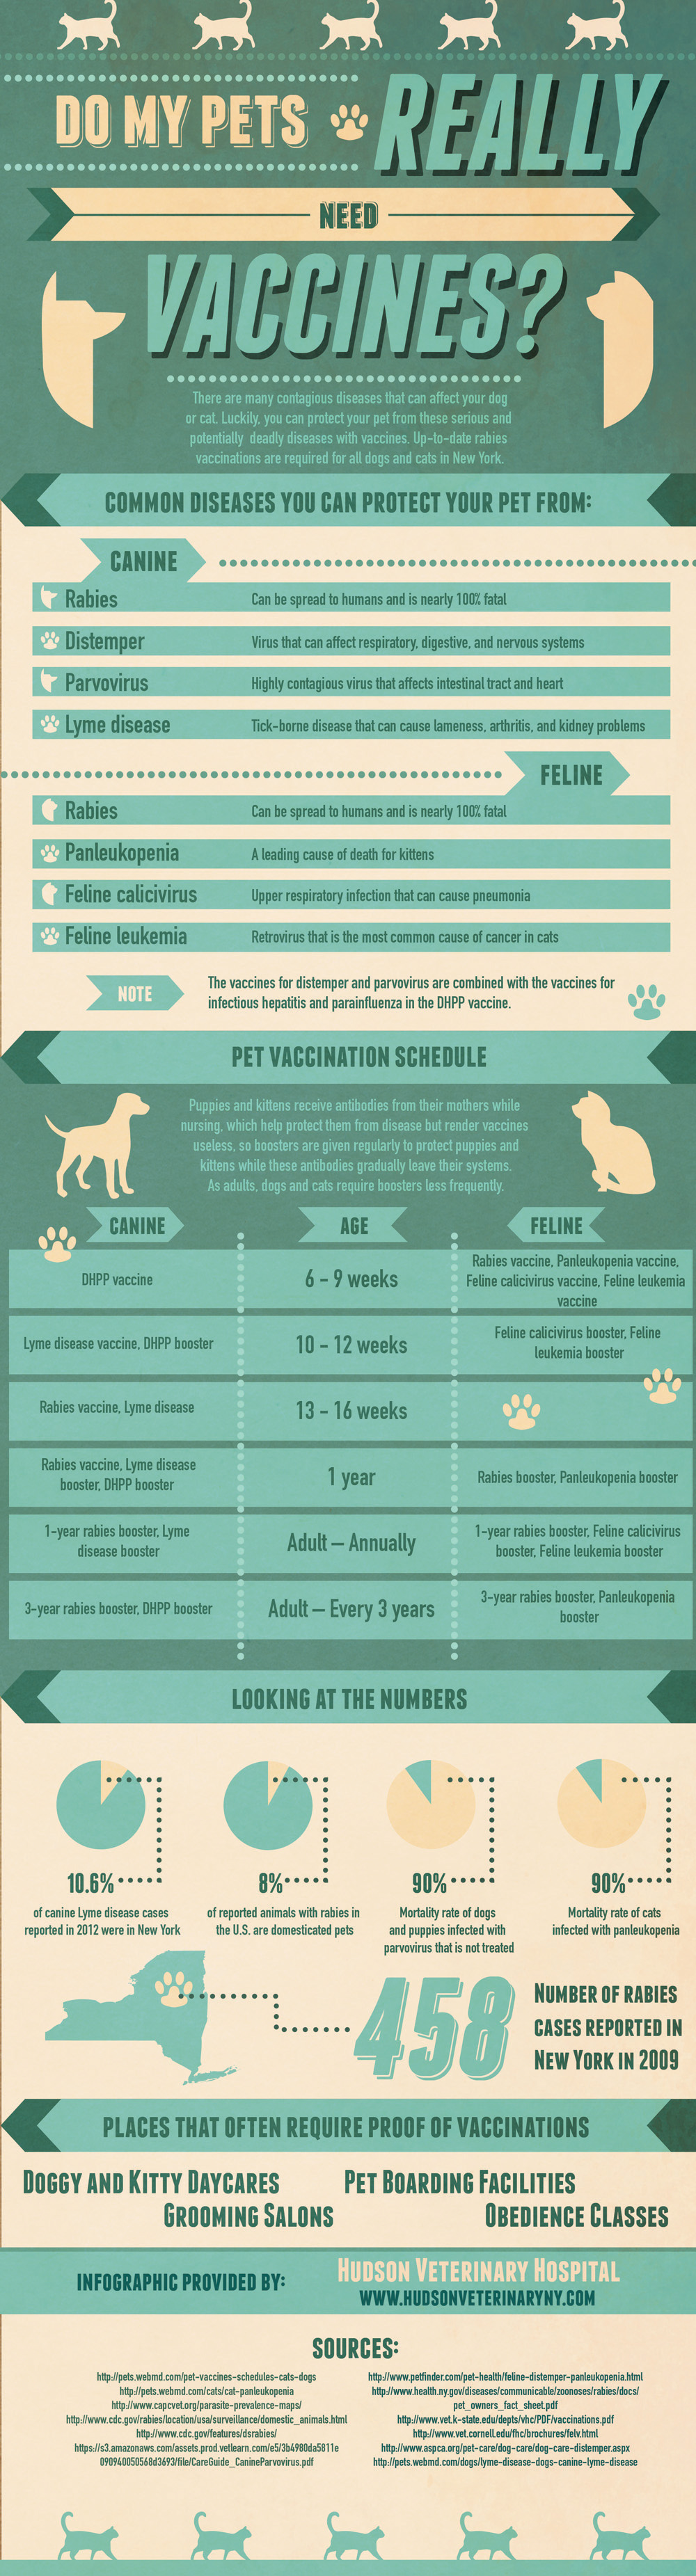 Do My Pets Really Need Vaccinations?